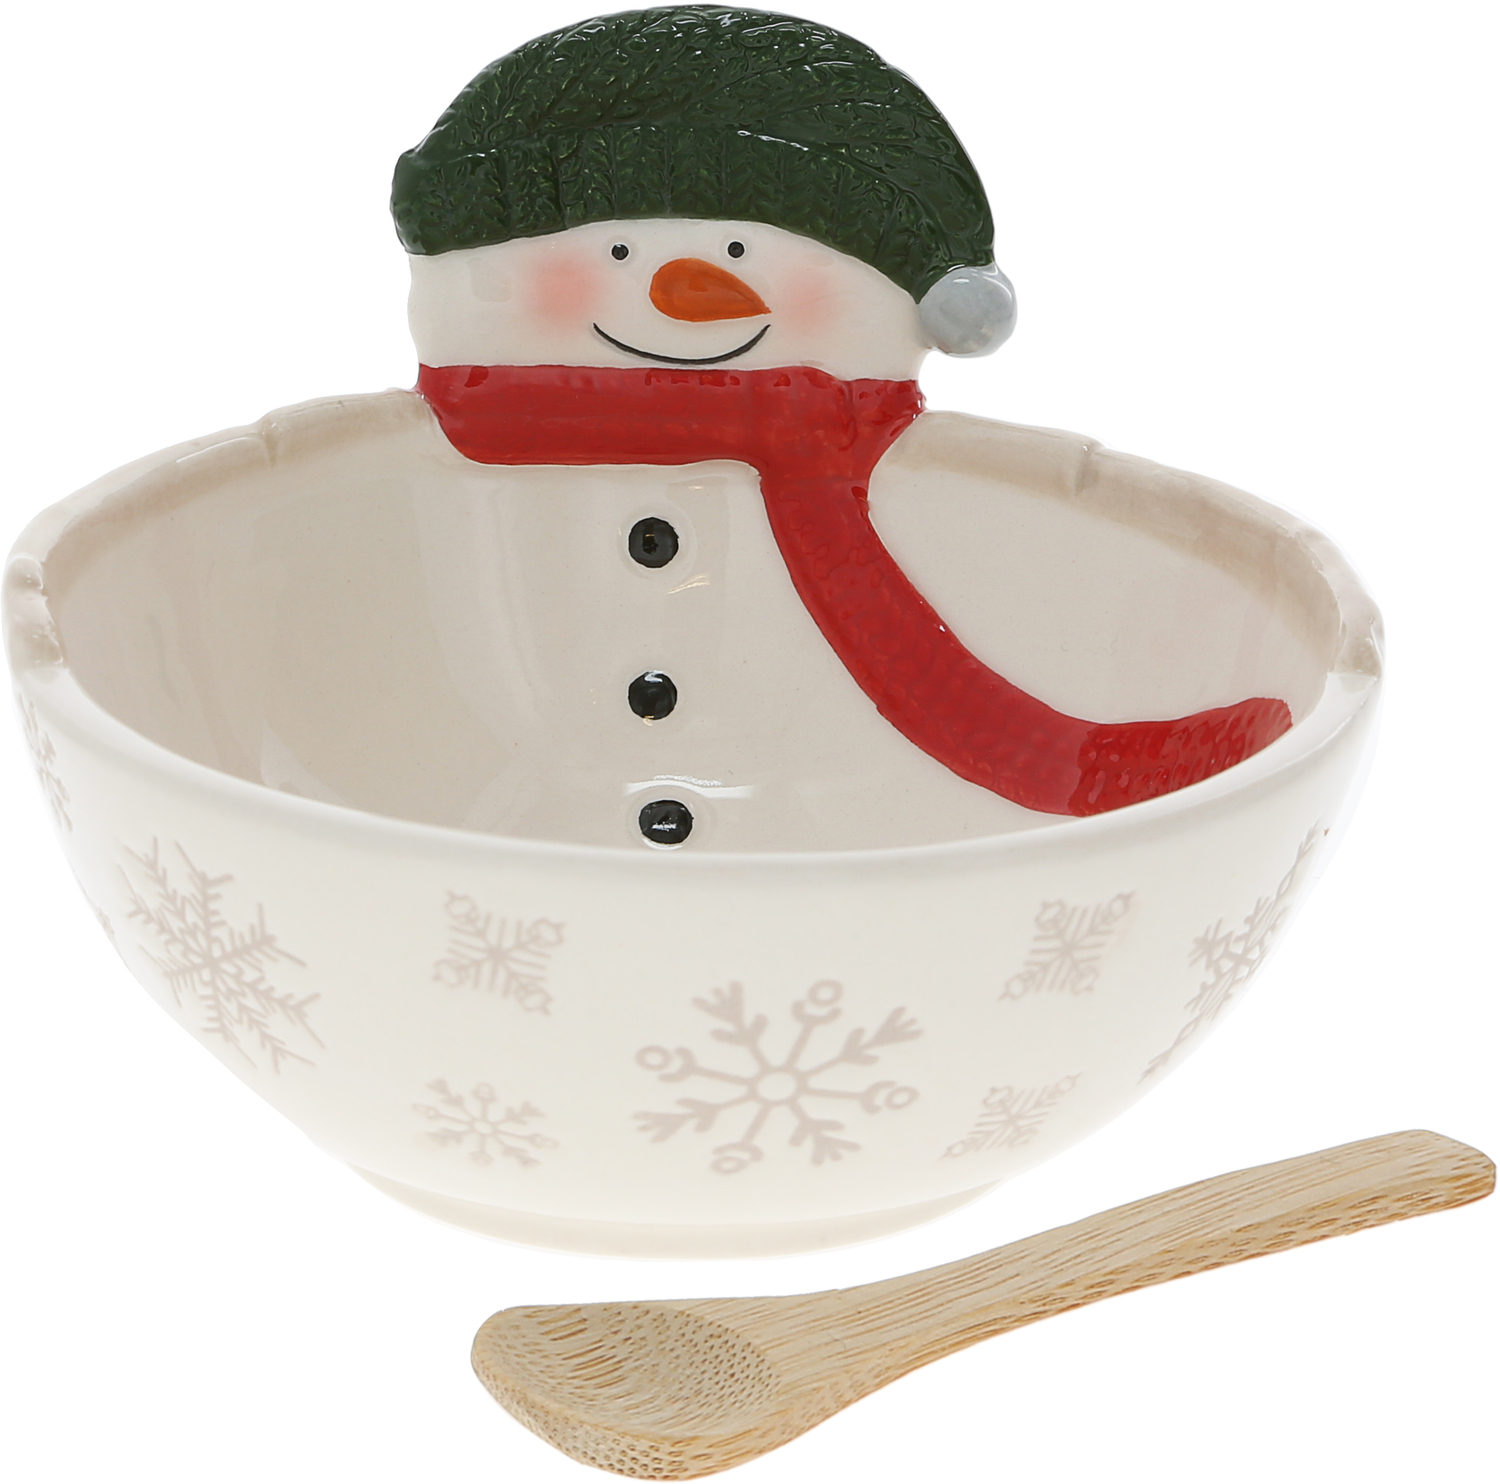 Snowball by The Birchhearts - Snowball - 4.5" Ceramic Bowl with Bamboo Spoon